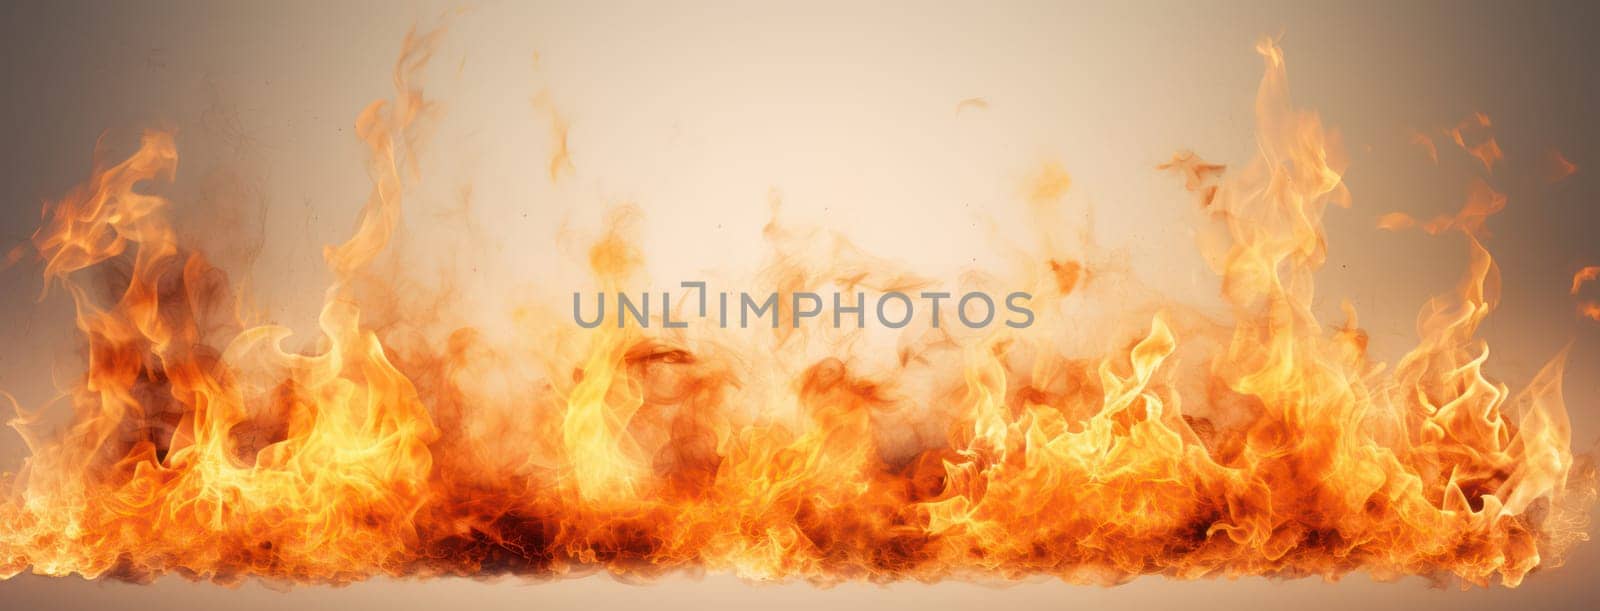 Blazing Inferno: A Fiery Dance of Destruction and Danger on a Black Background. by Vichizh